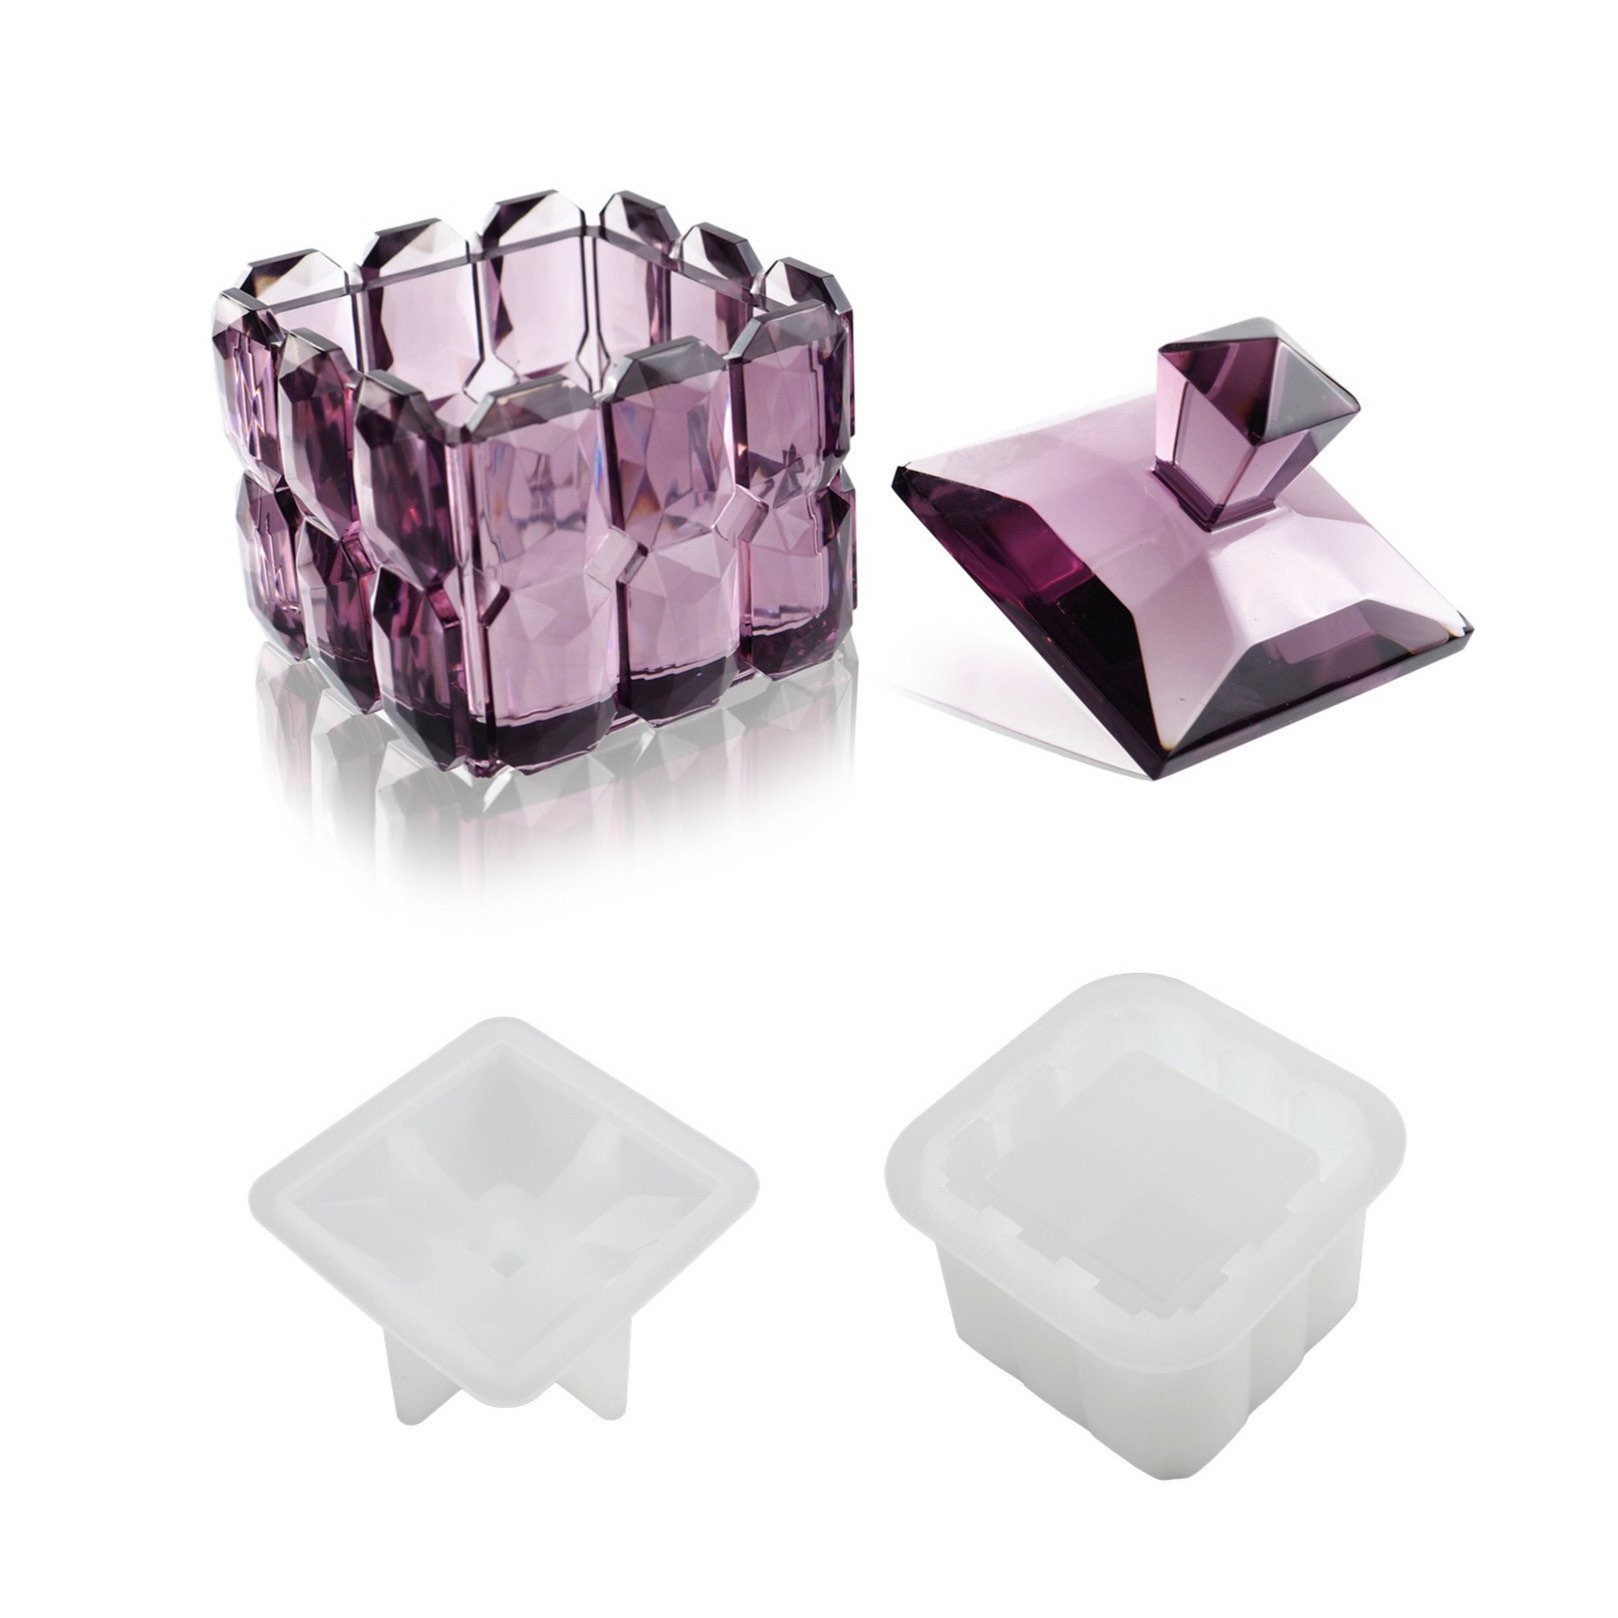 DM225 Square Silicone Tissue Box Resina Epoxi Kit Completo Resin Casting  Mould for Jewelry Storage DlY Gift Box